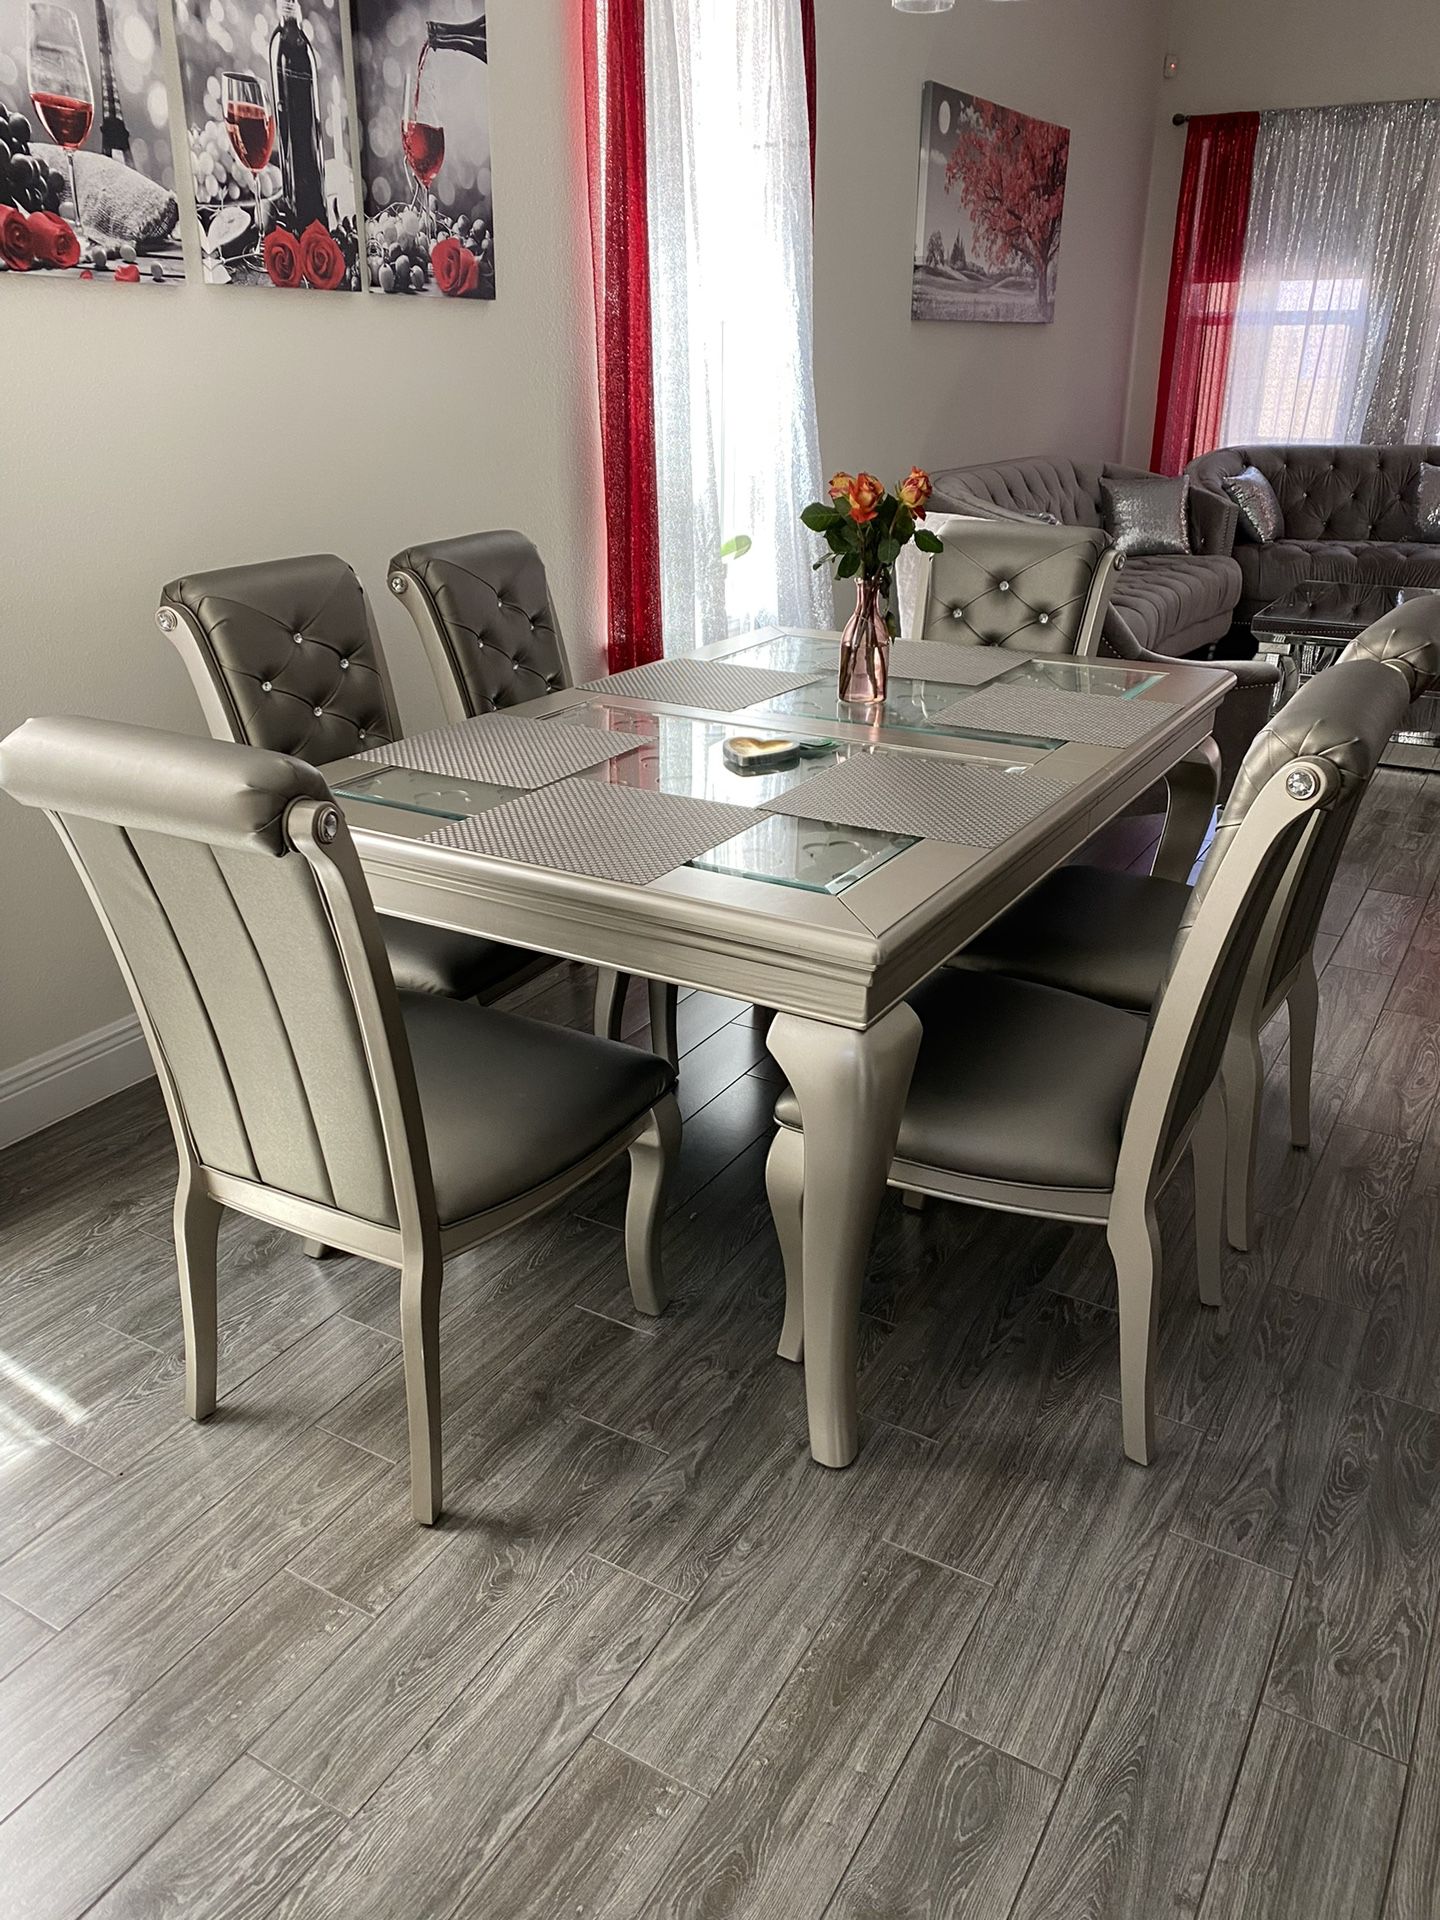 New Dining Room Set With Extra Leaf